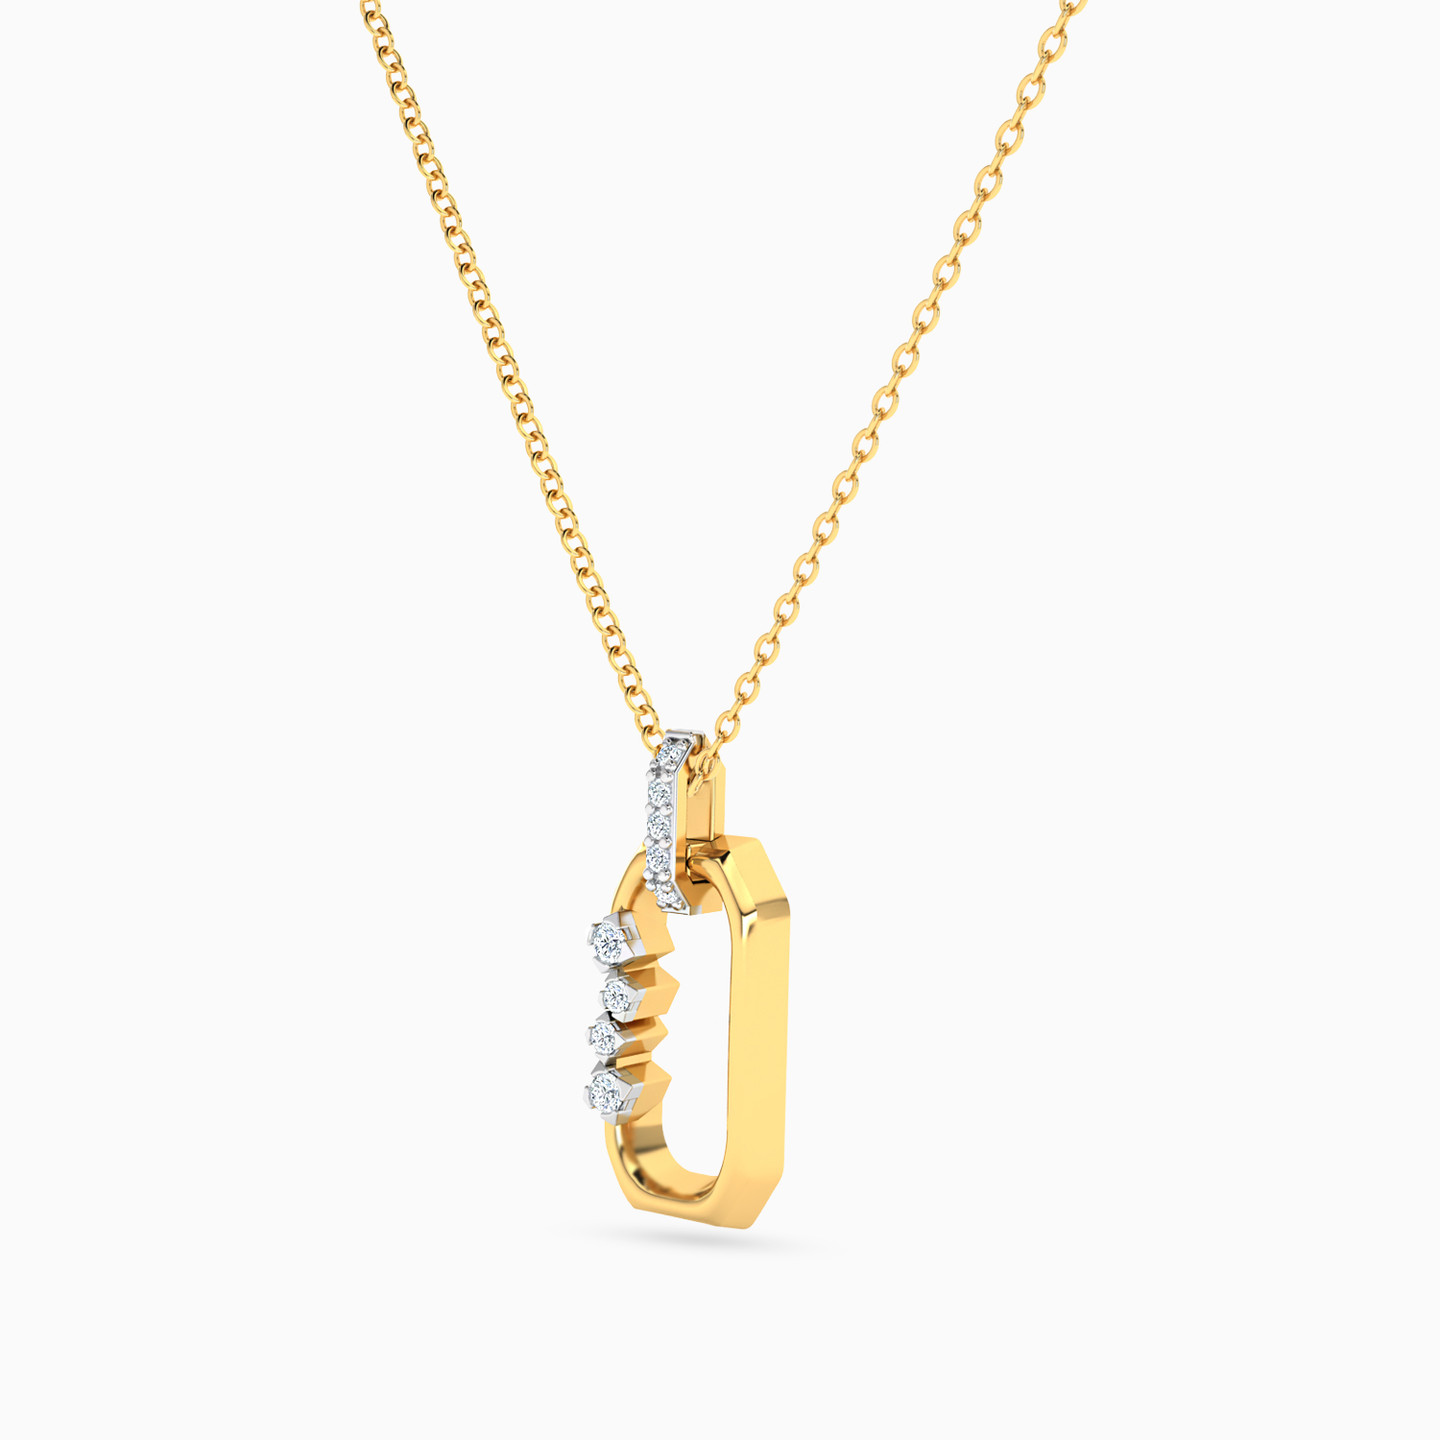 Rectangle Shaped Cubic Zirconia Pendant with 18K Gold Chain - 2